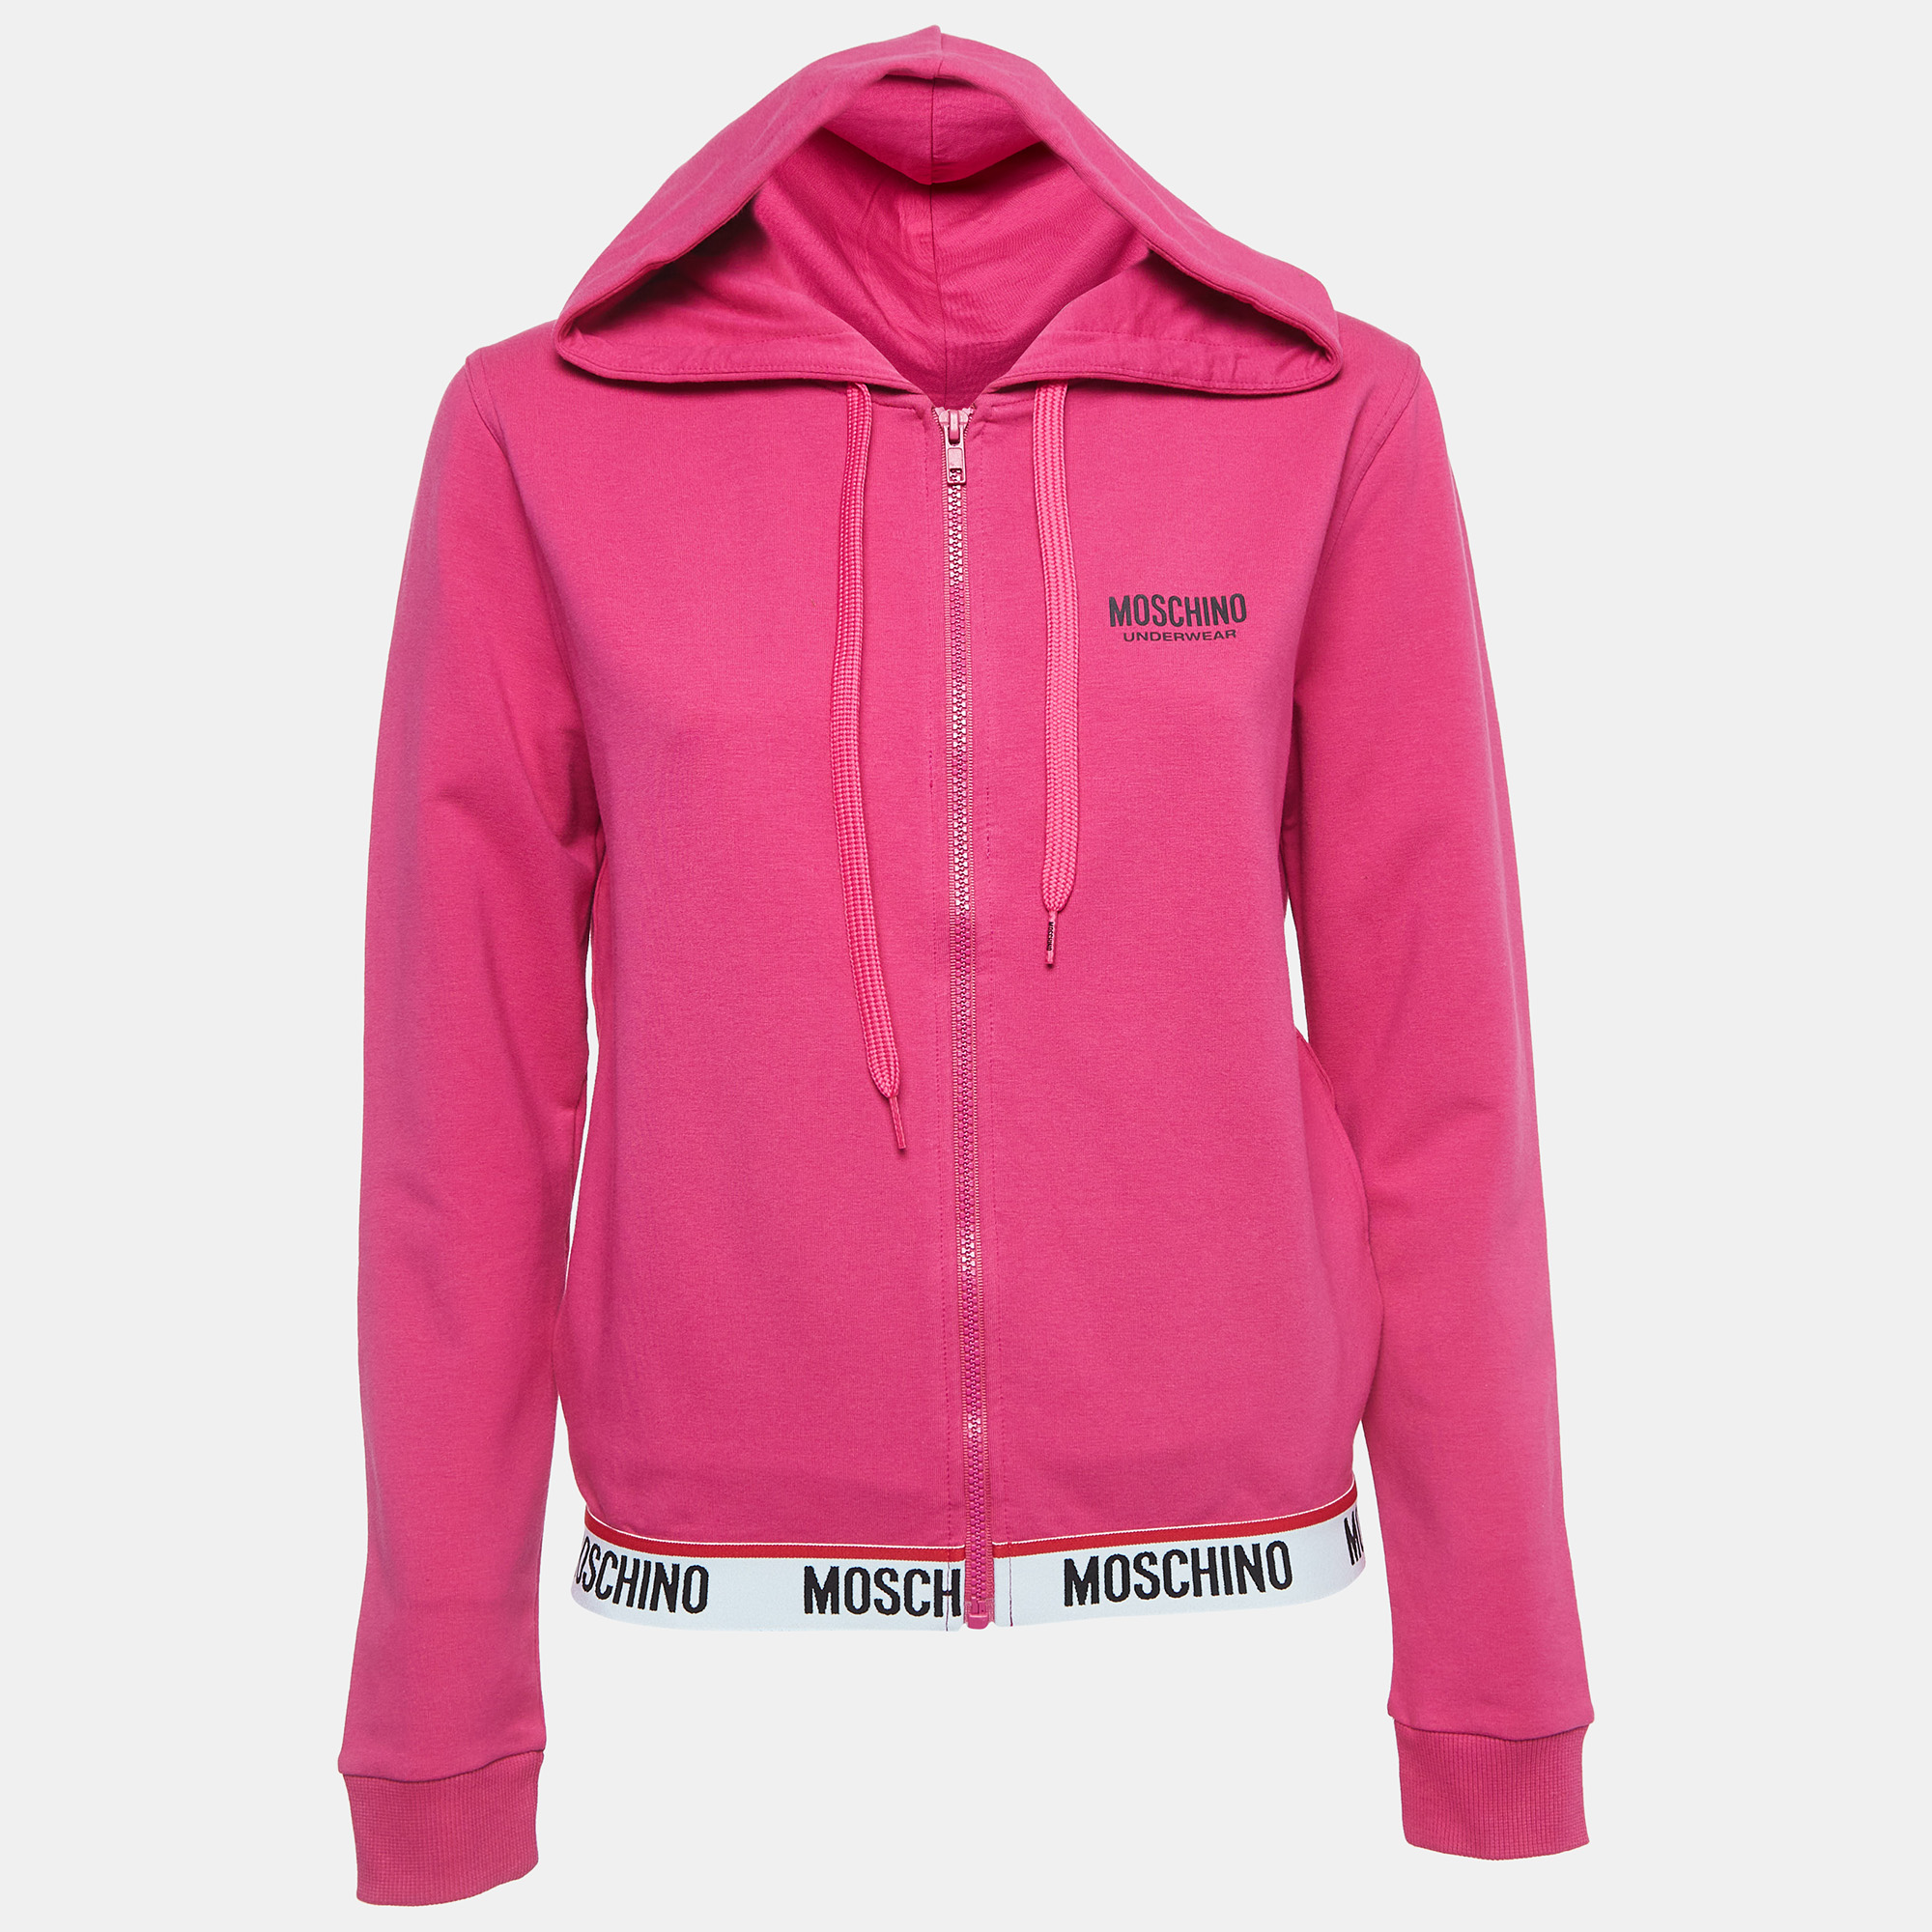 Moschino pink logo print cotton zip front hooded jacket s